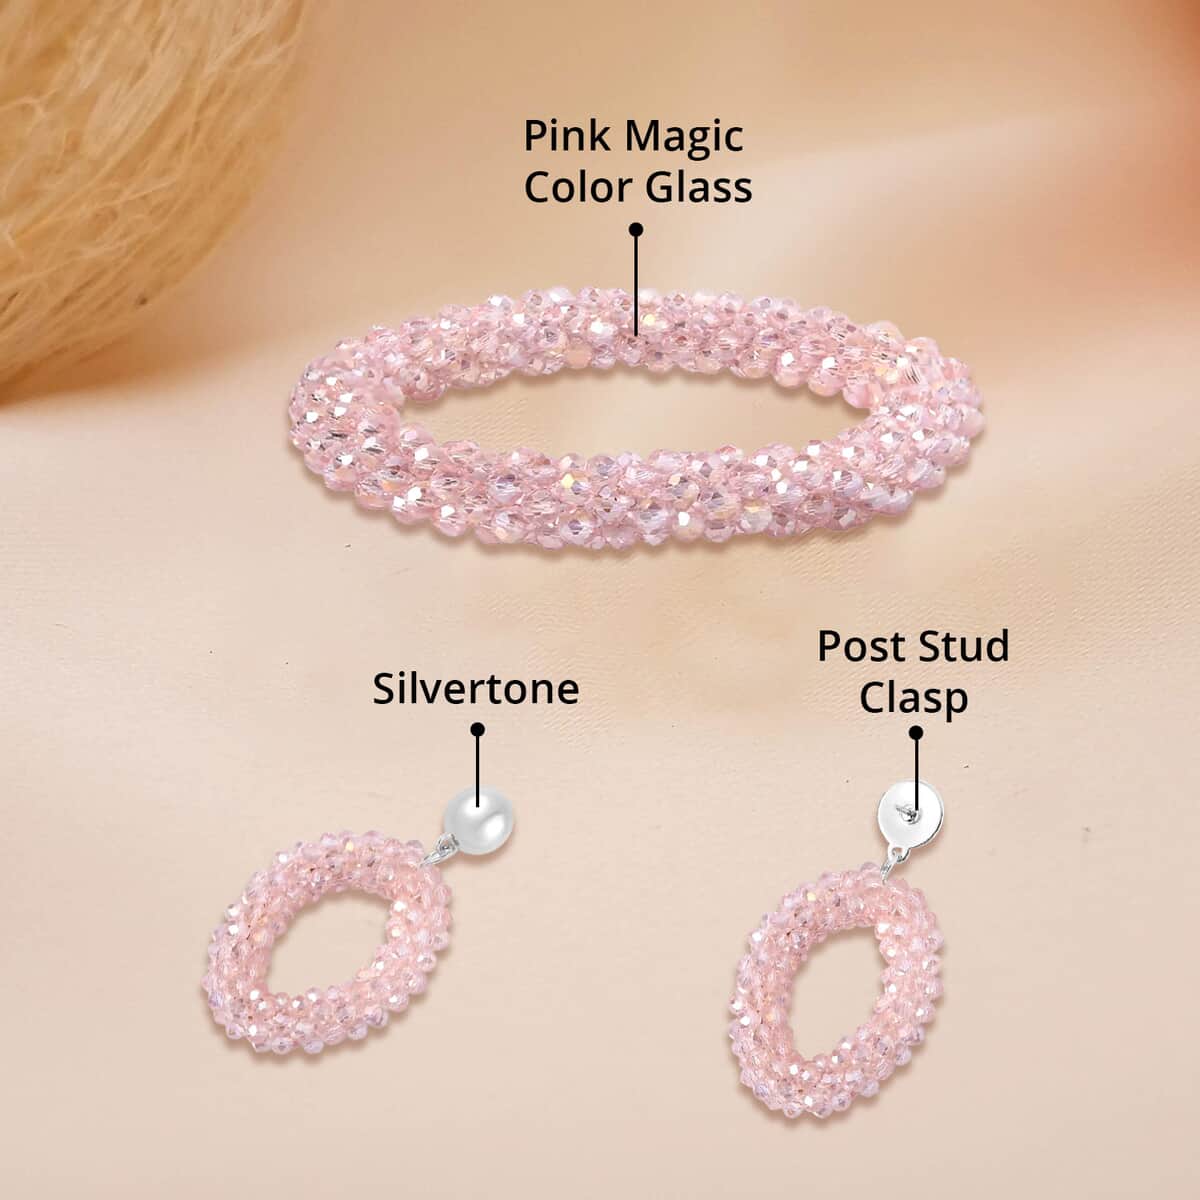 Pink Magic Color Glass Beaded Bracelet (7.0-7.50In) and Earrings in Silvertone image number 4